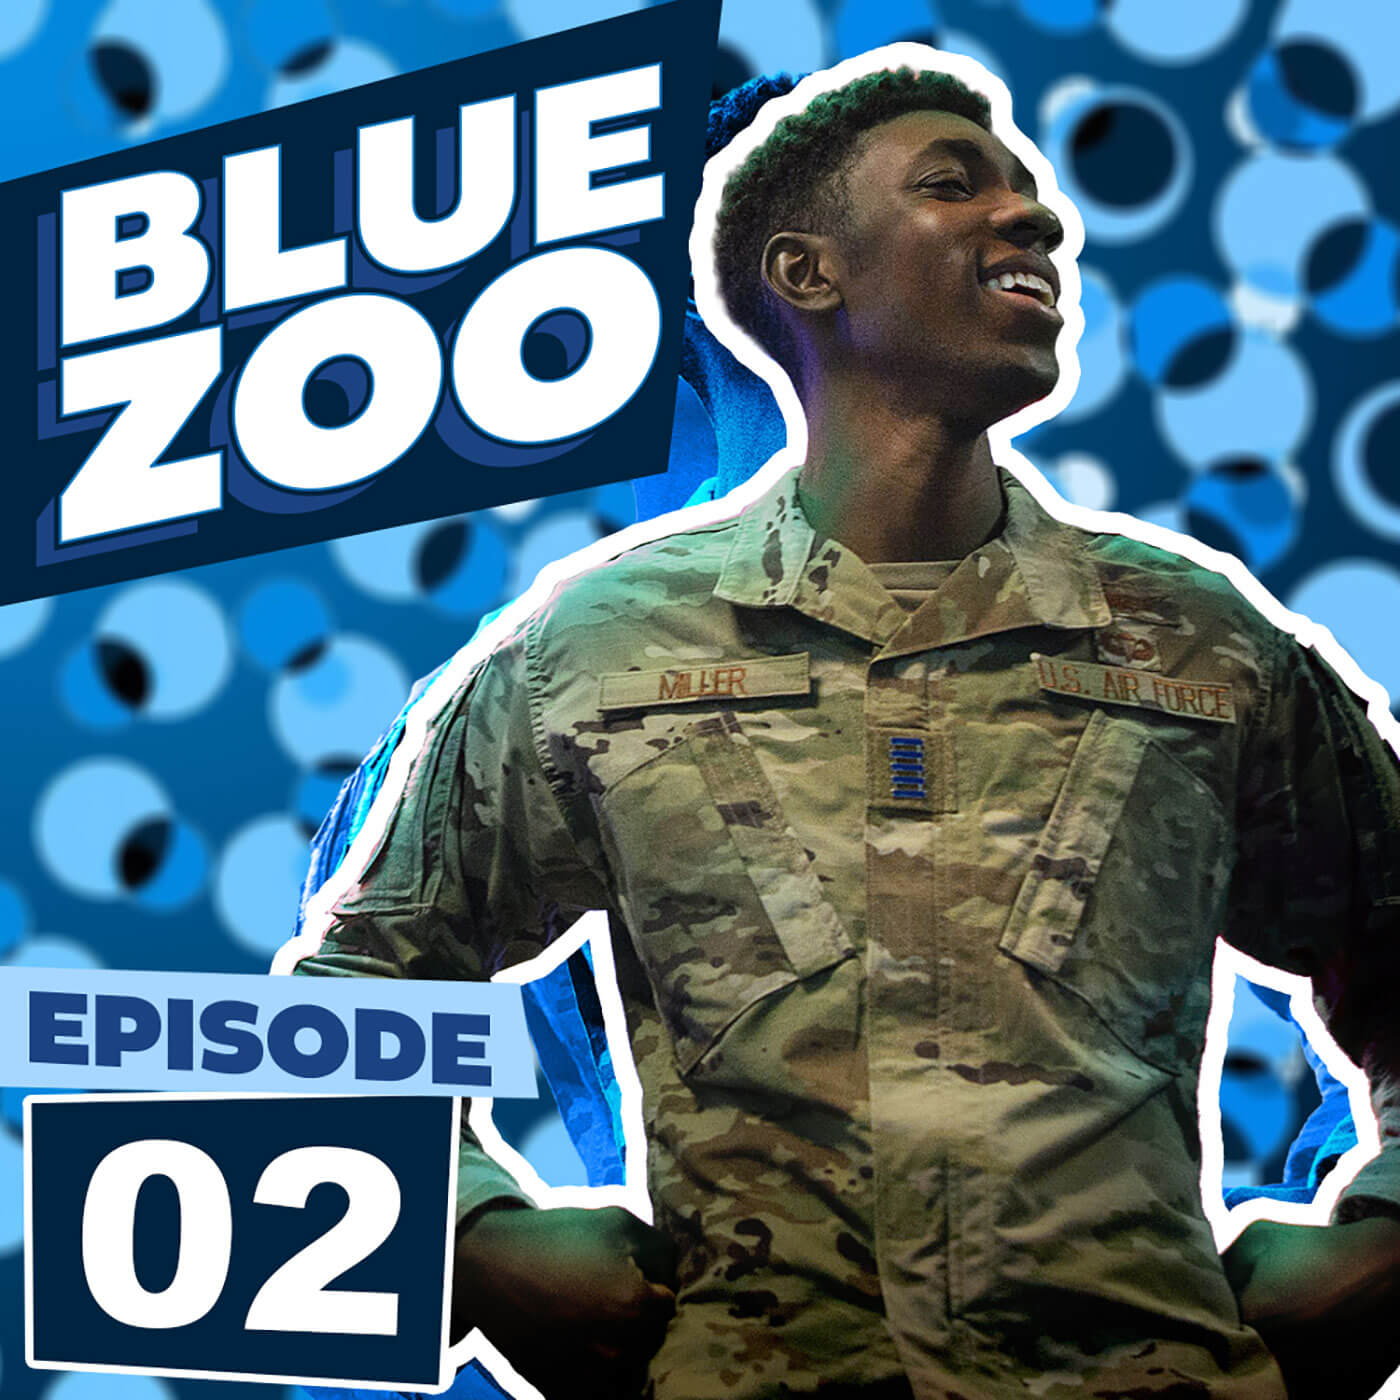 Blue Zoo Episode 2 graphic